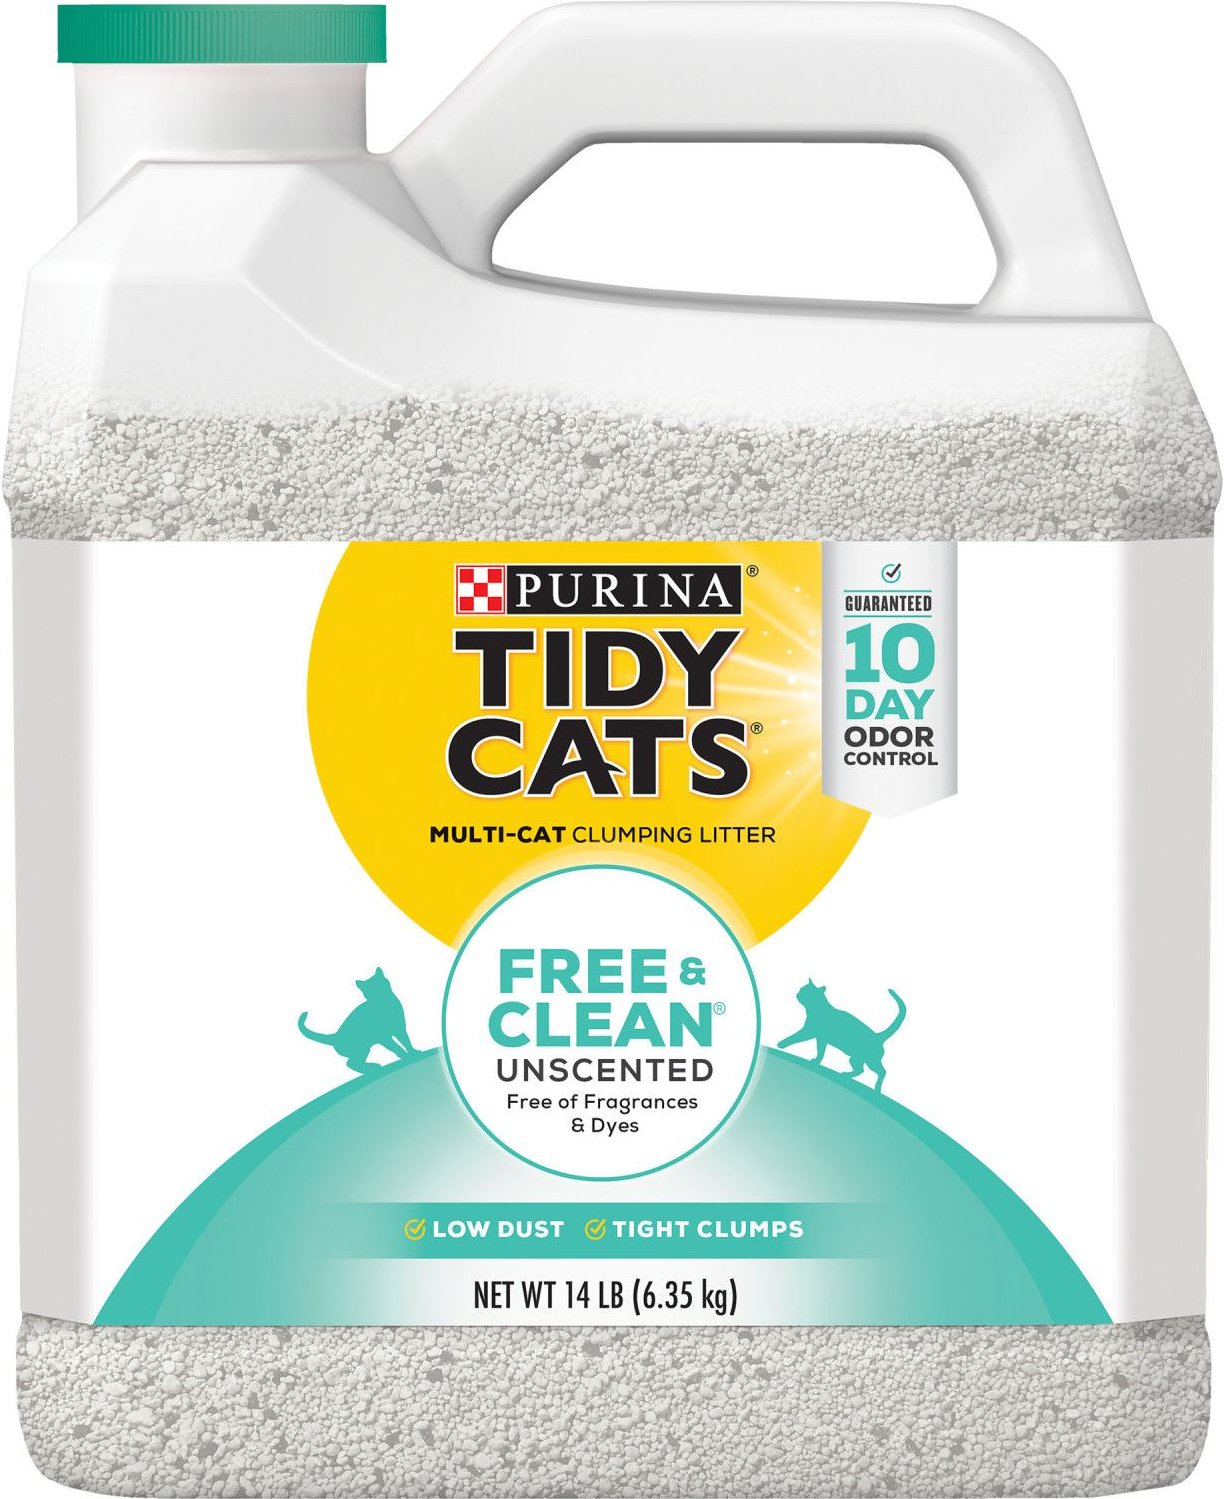 tidy cat free and clean litter